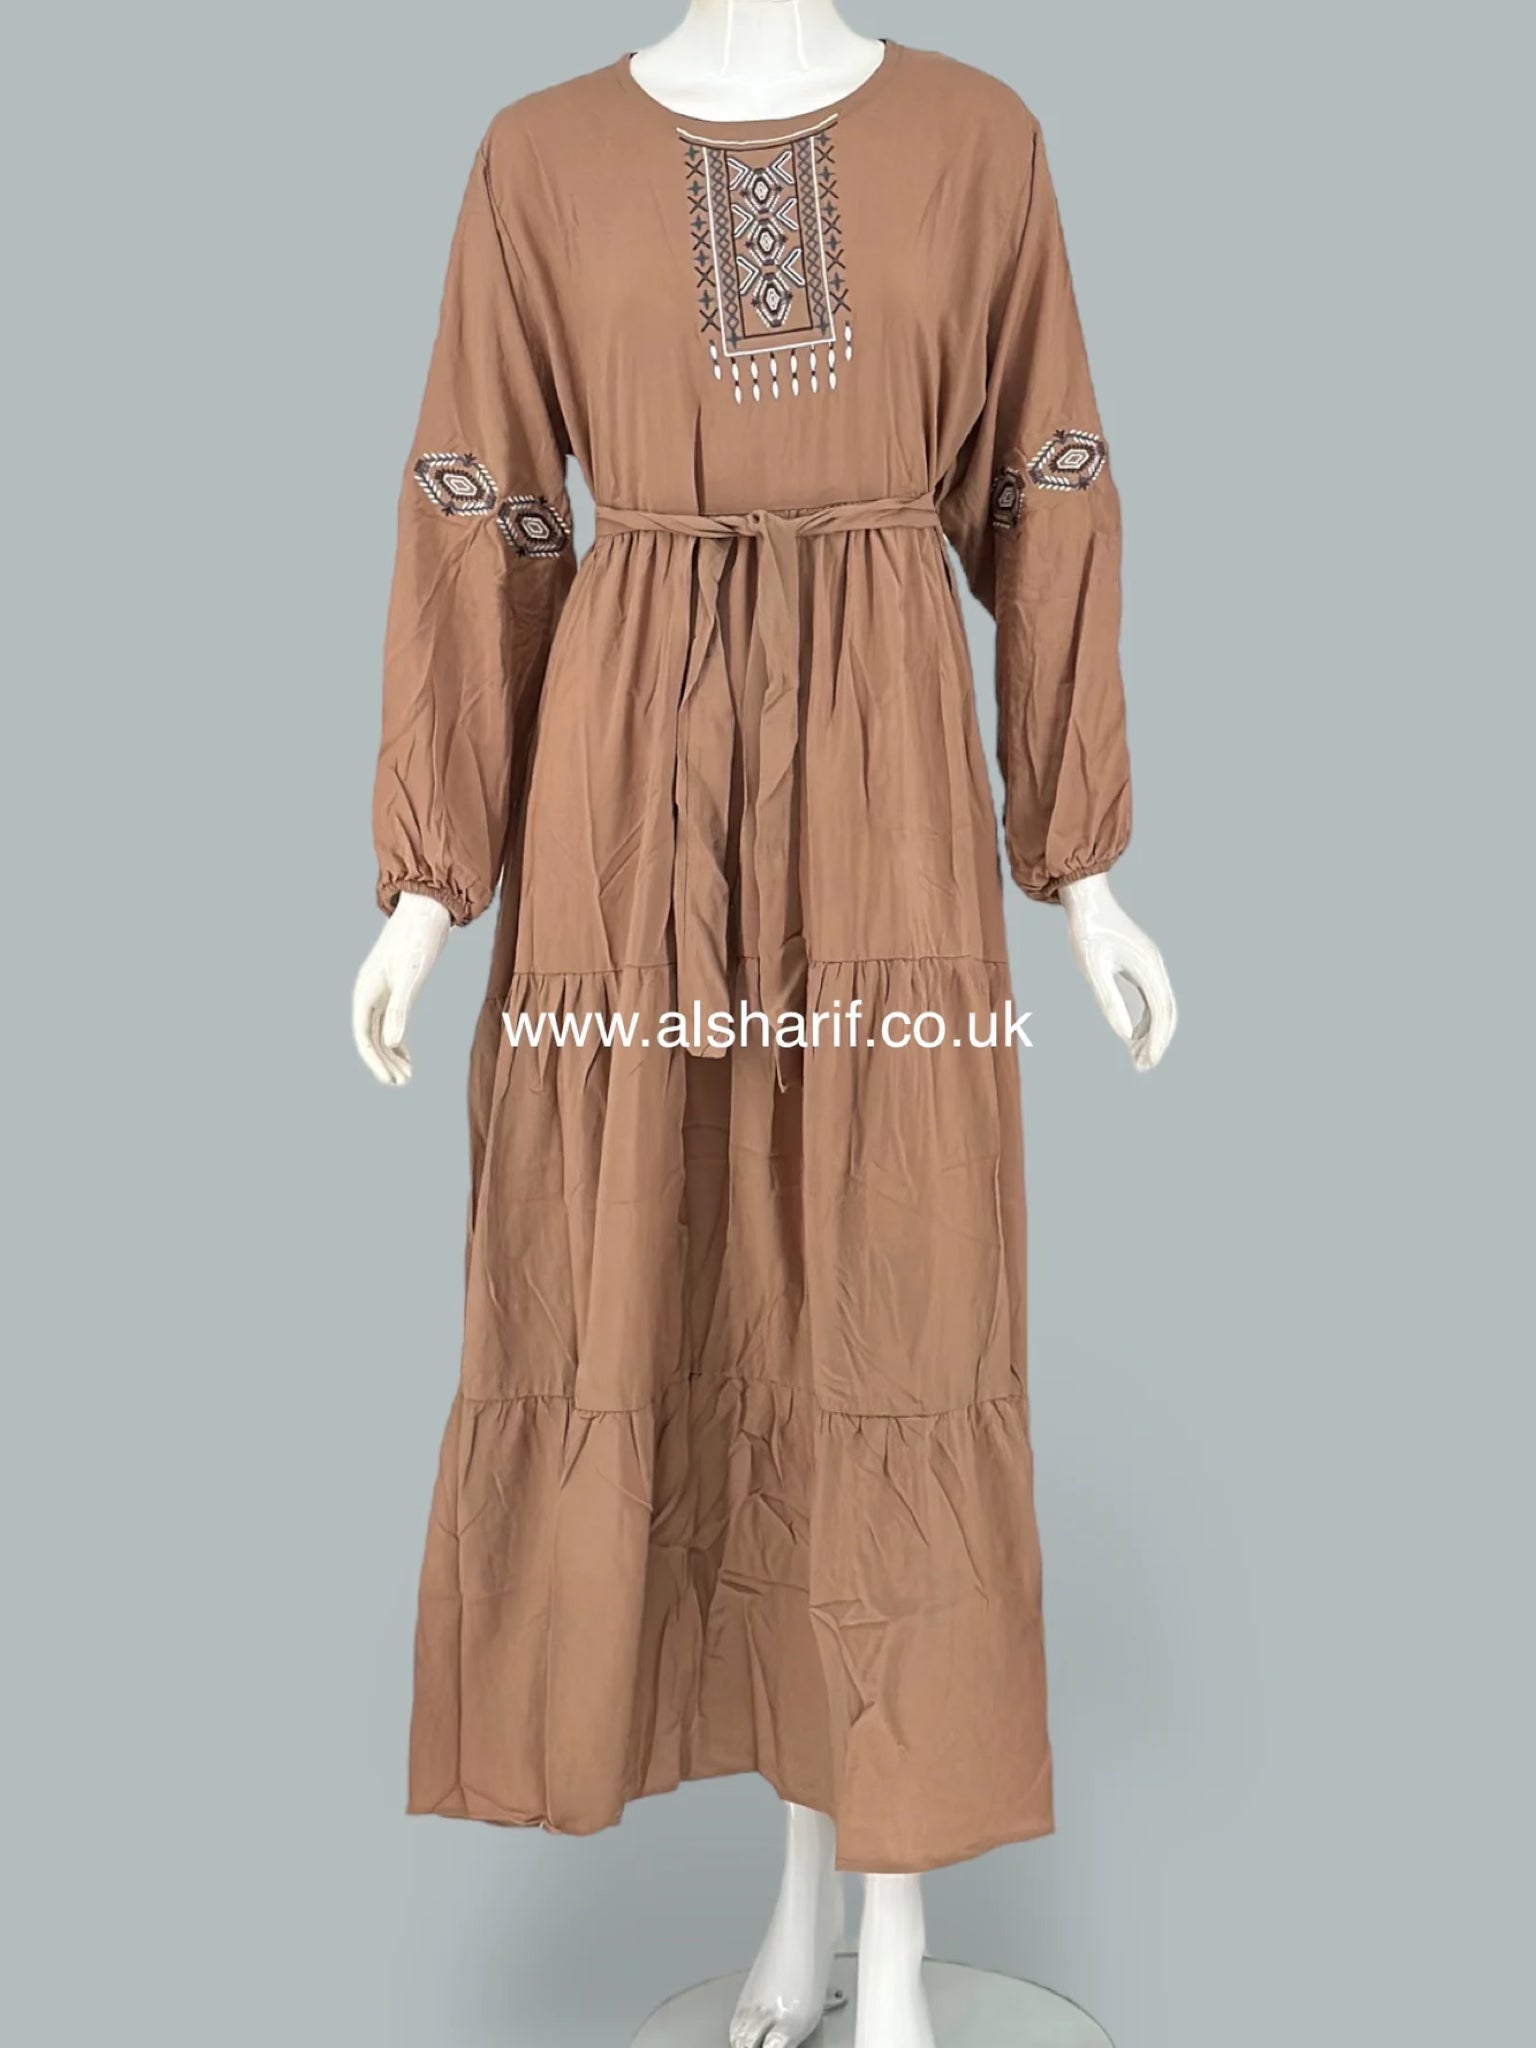 Flared Embroidered Tiered Cotton Dress - D37